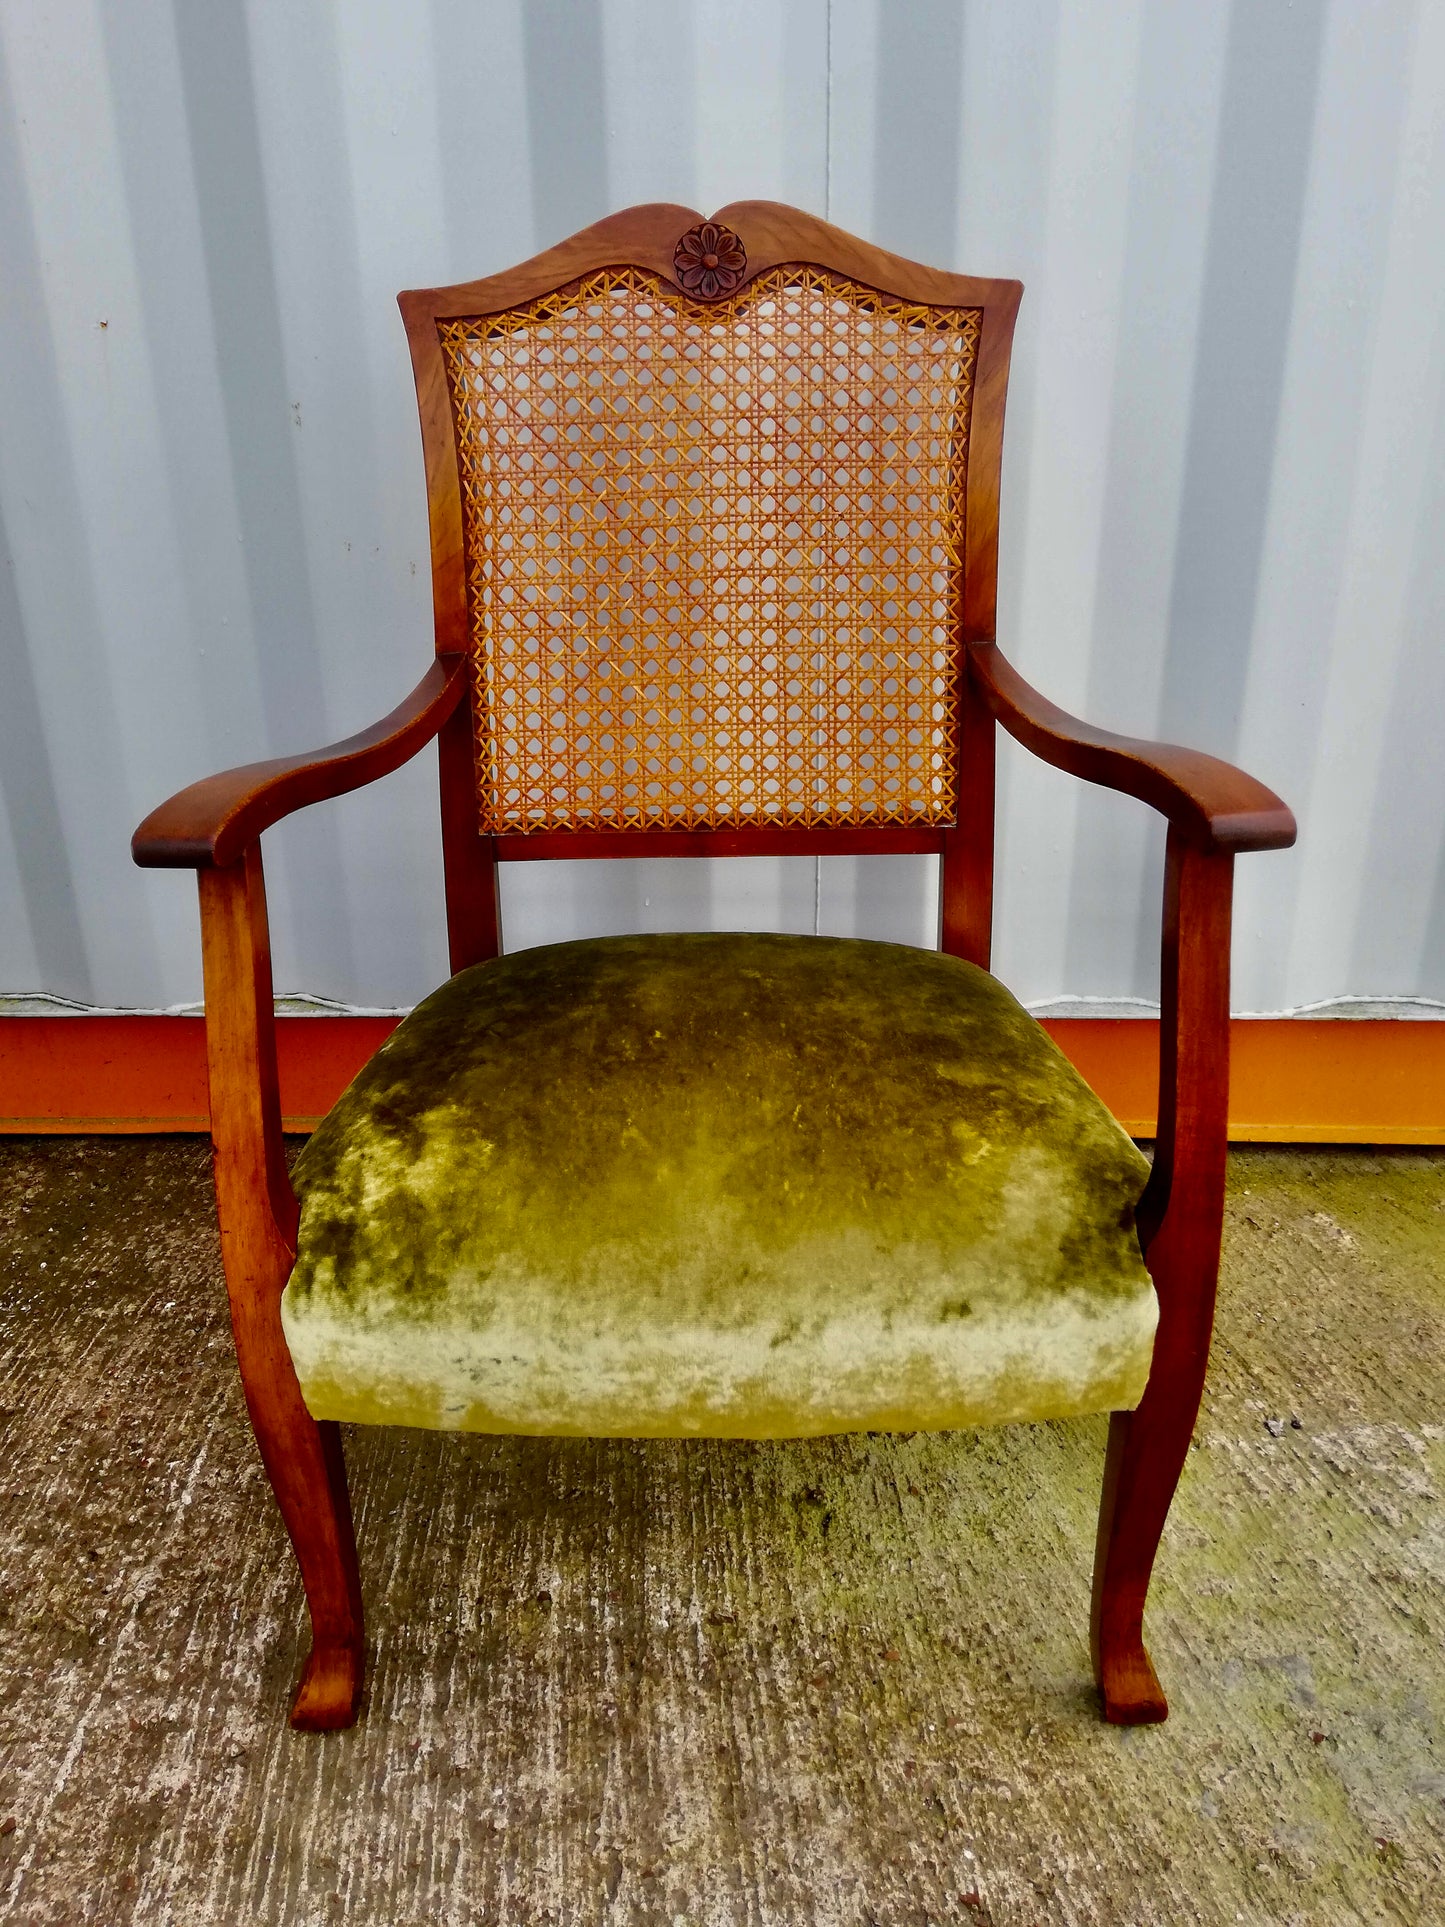 Vintage bergere chair available for reupholstery and painting your choice of colour